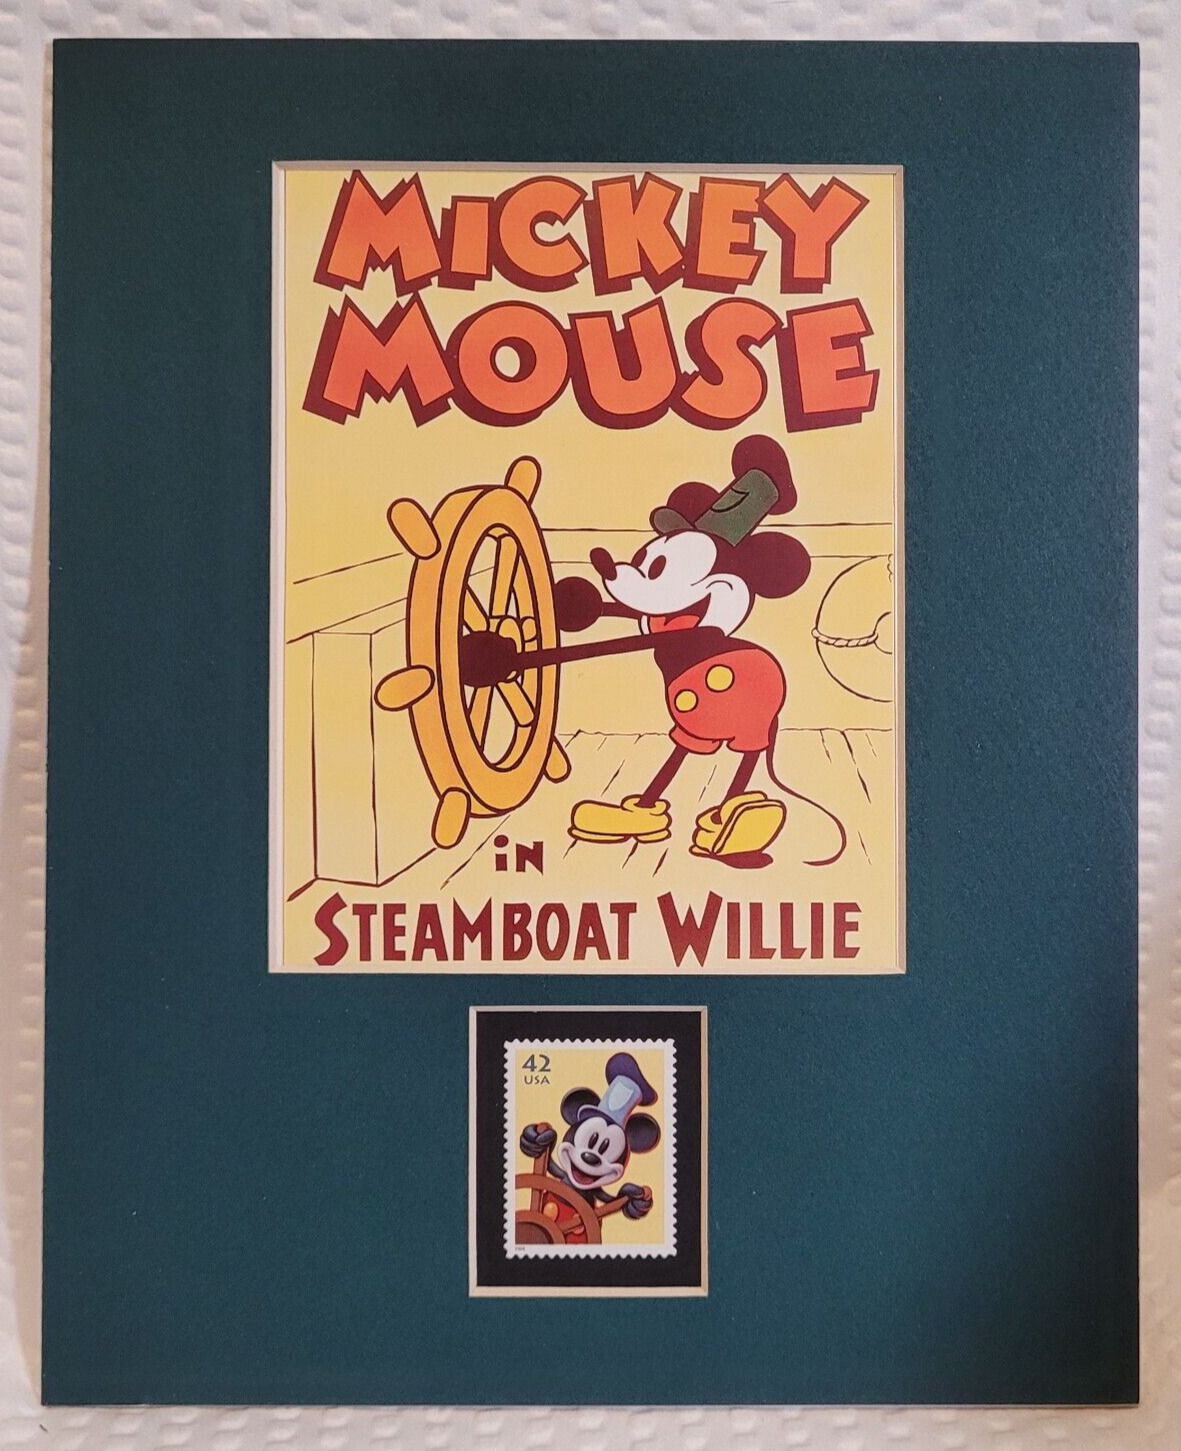 MICKEY MOUSE - STEAMBOAT WILLIE - DISNEY - MATTED STAMP ART - 1366